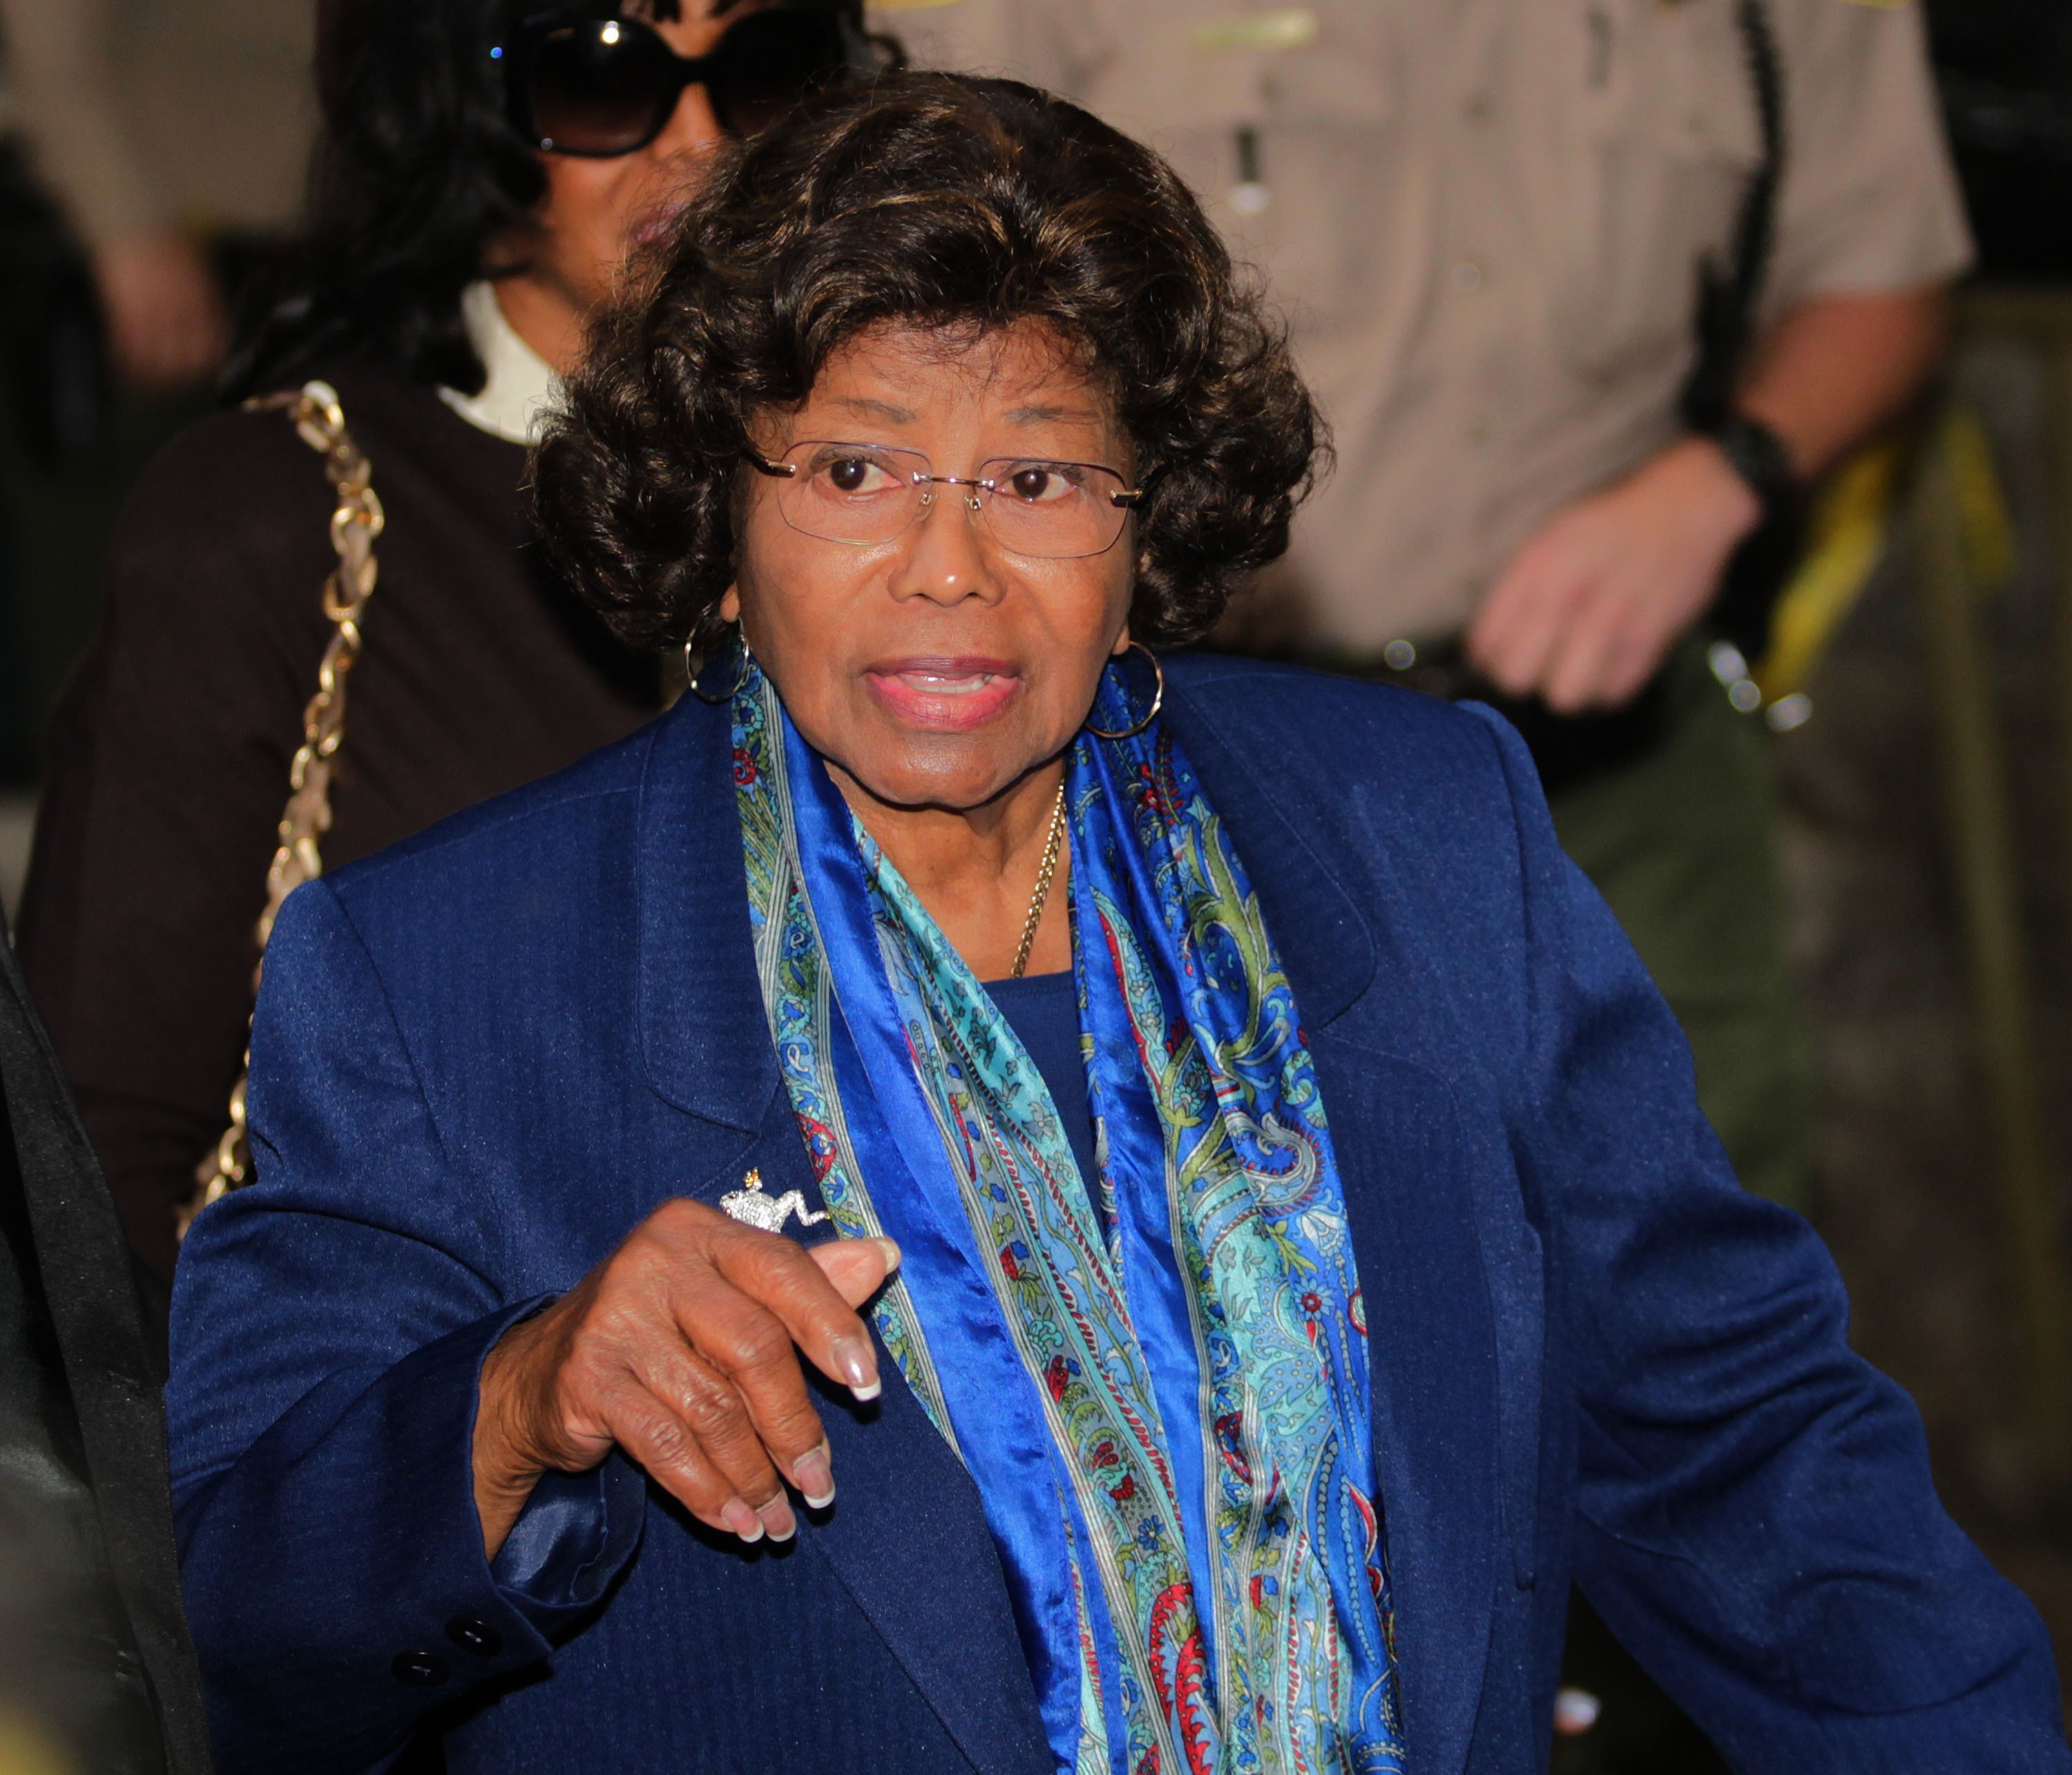 Katherine Jackson at the Los Angeles County courthouse for the arraignment of Dr. Conrad Murray on January 25, 2011 | Source: Getty Images